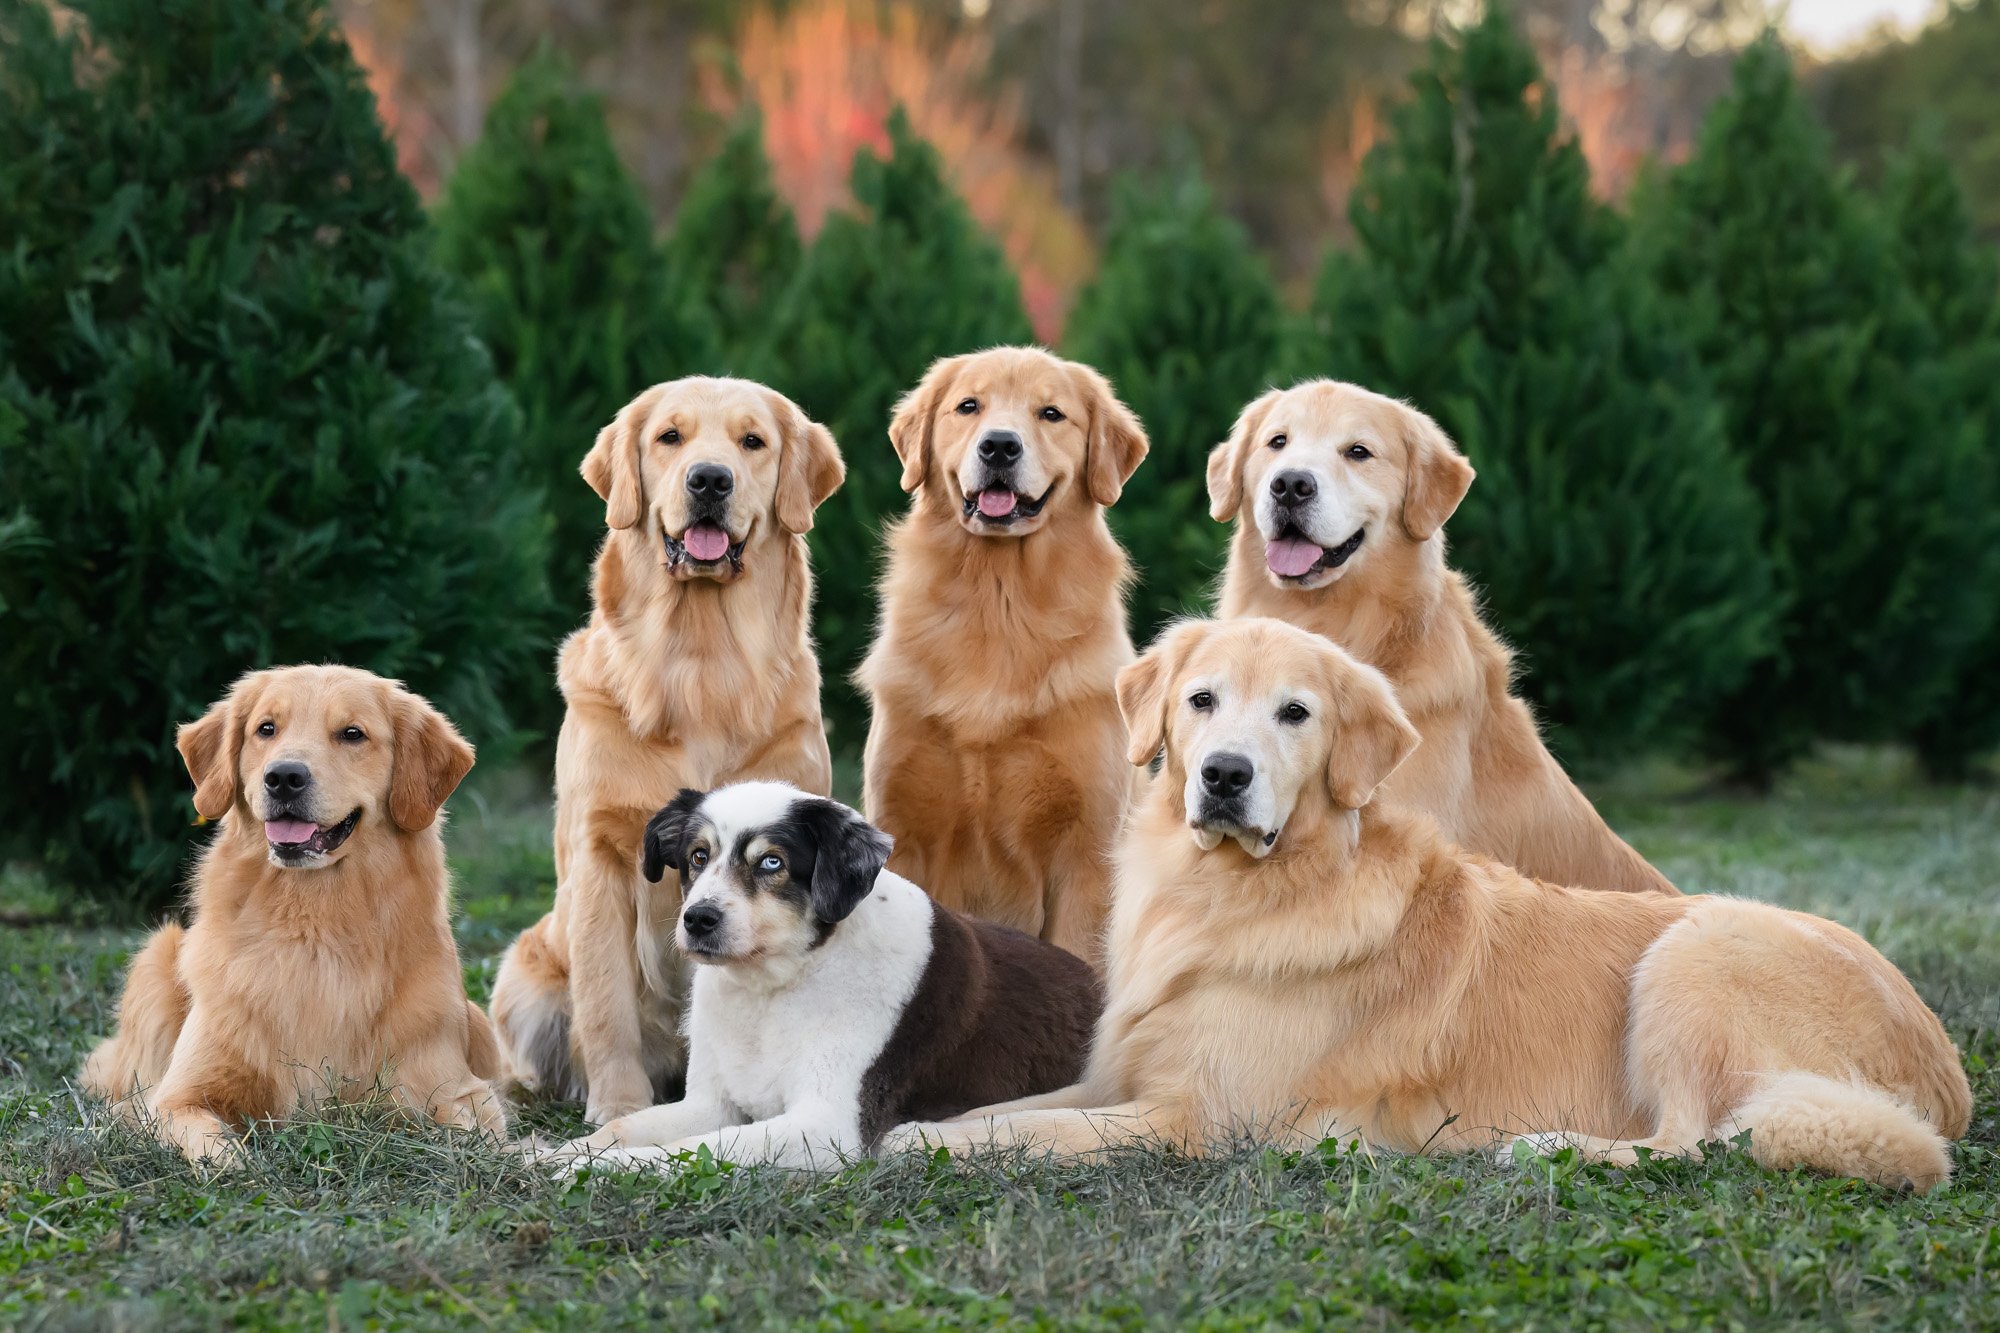 6 well trained dog posing for holiday card in Christmas tree farm